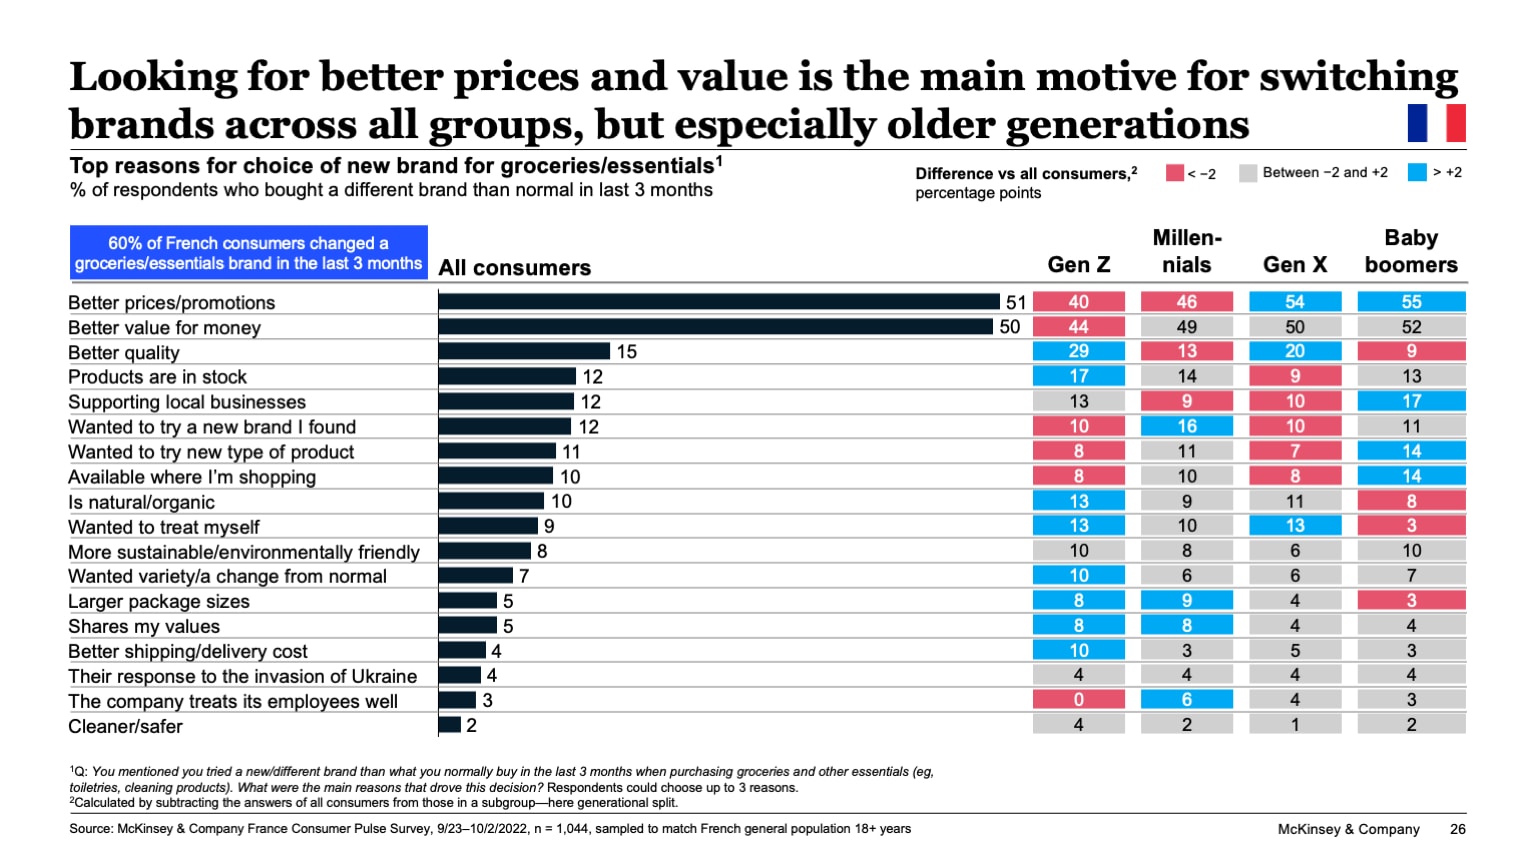 Looking for better prices and value is the main motive for switching brands across all groups, but especially older generations